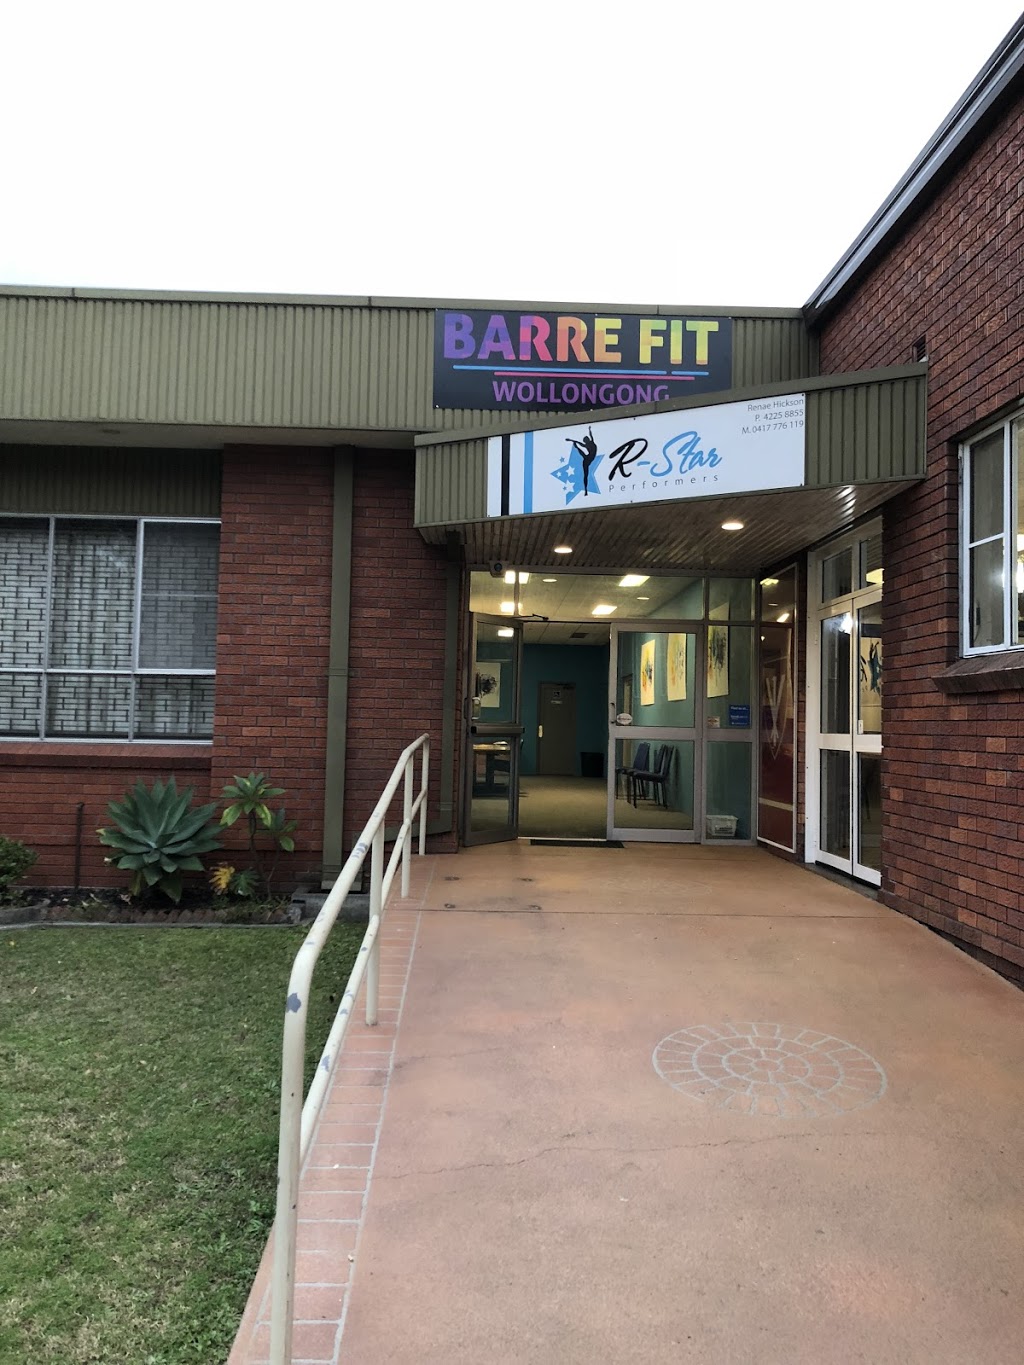 Barre Fit Wollongong | gym | 143 Gipps Rd, Keiraville NSW 2500, Australia | 0417776119 OR +61 417 776 119